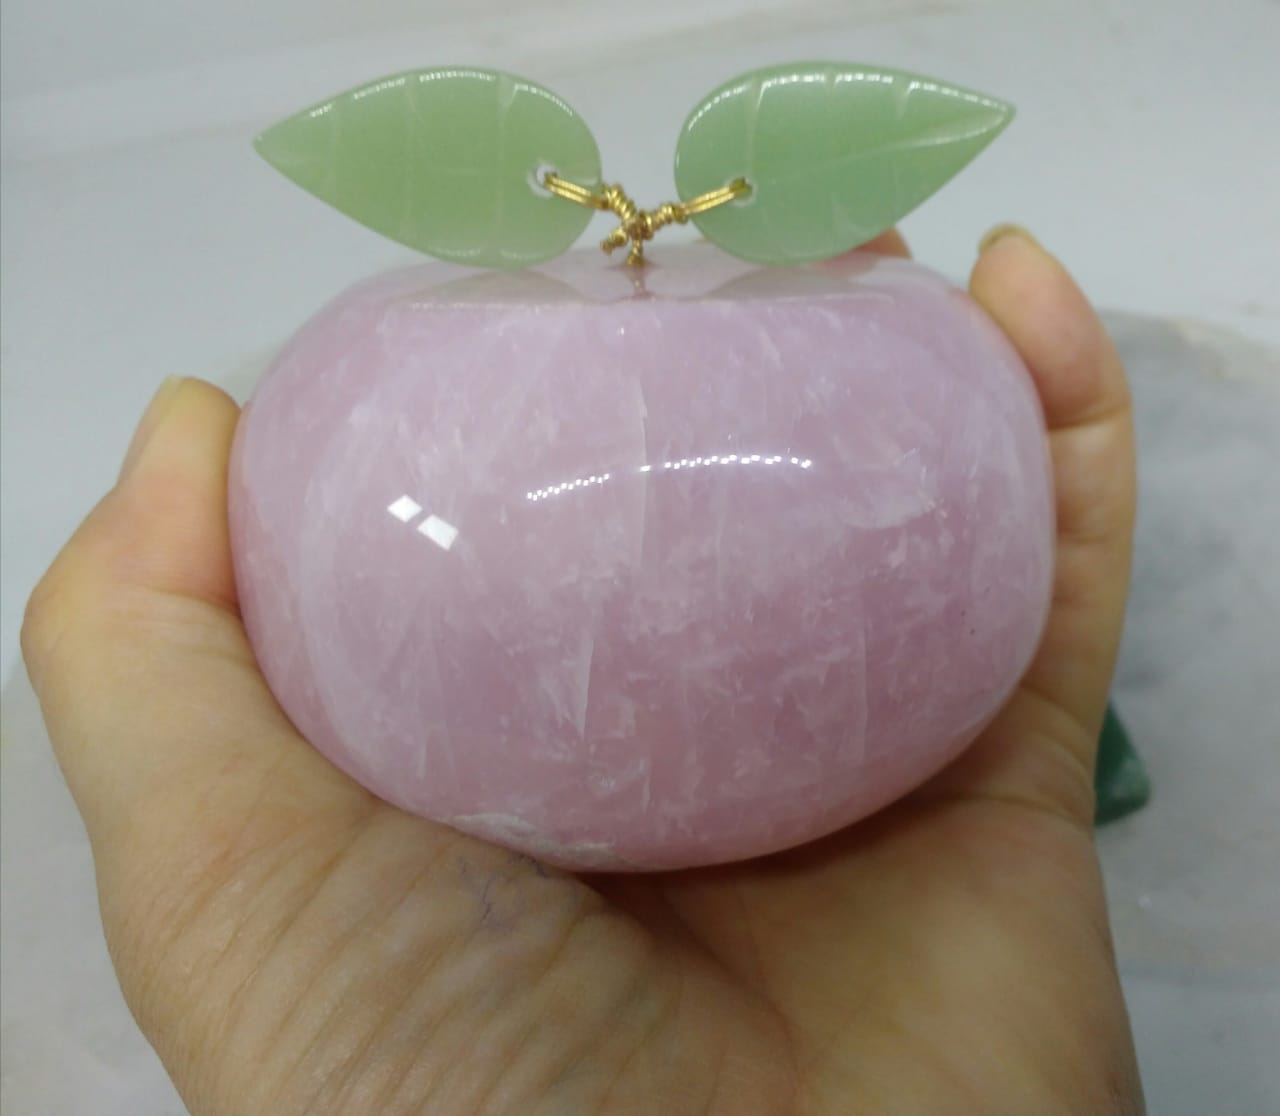 Stones from Uruguay - Rose Quartz Carving Apple - Rose Quartz Carving Apple for Love, Rose Quartz Apple for Home 